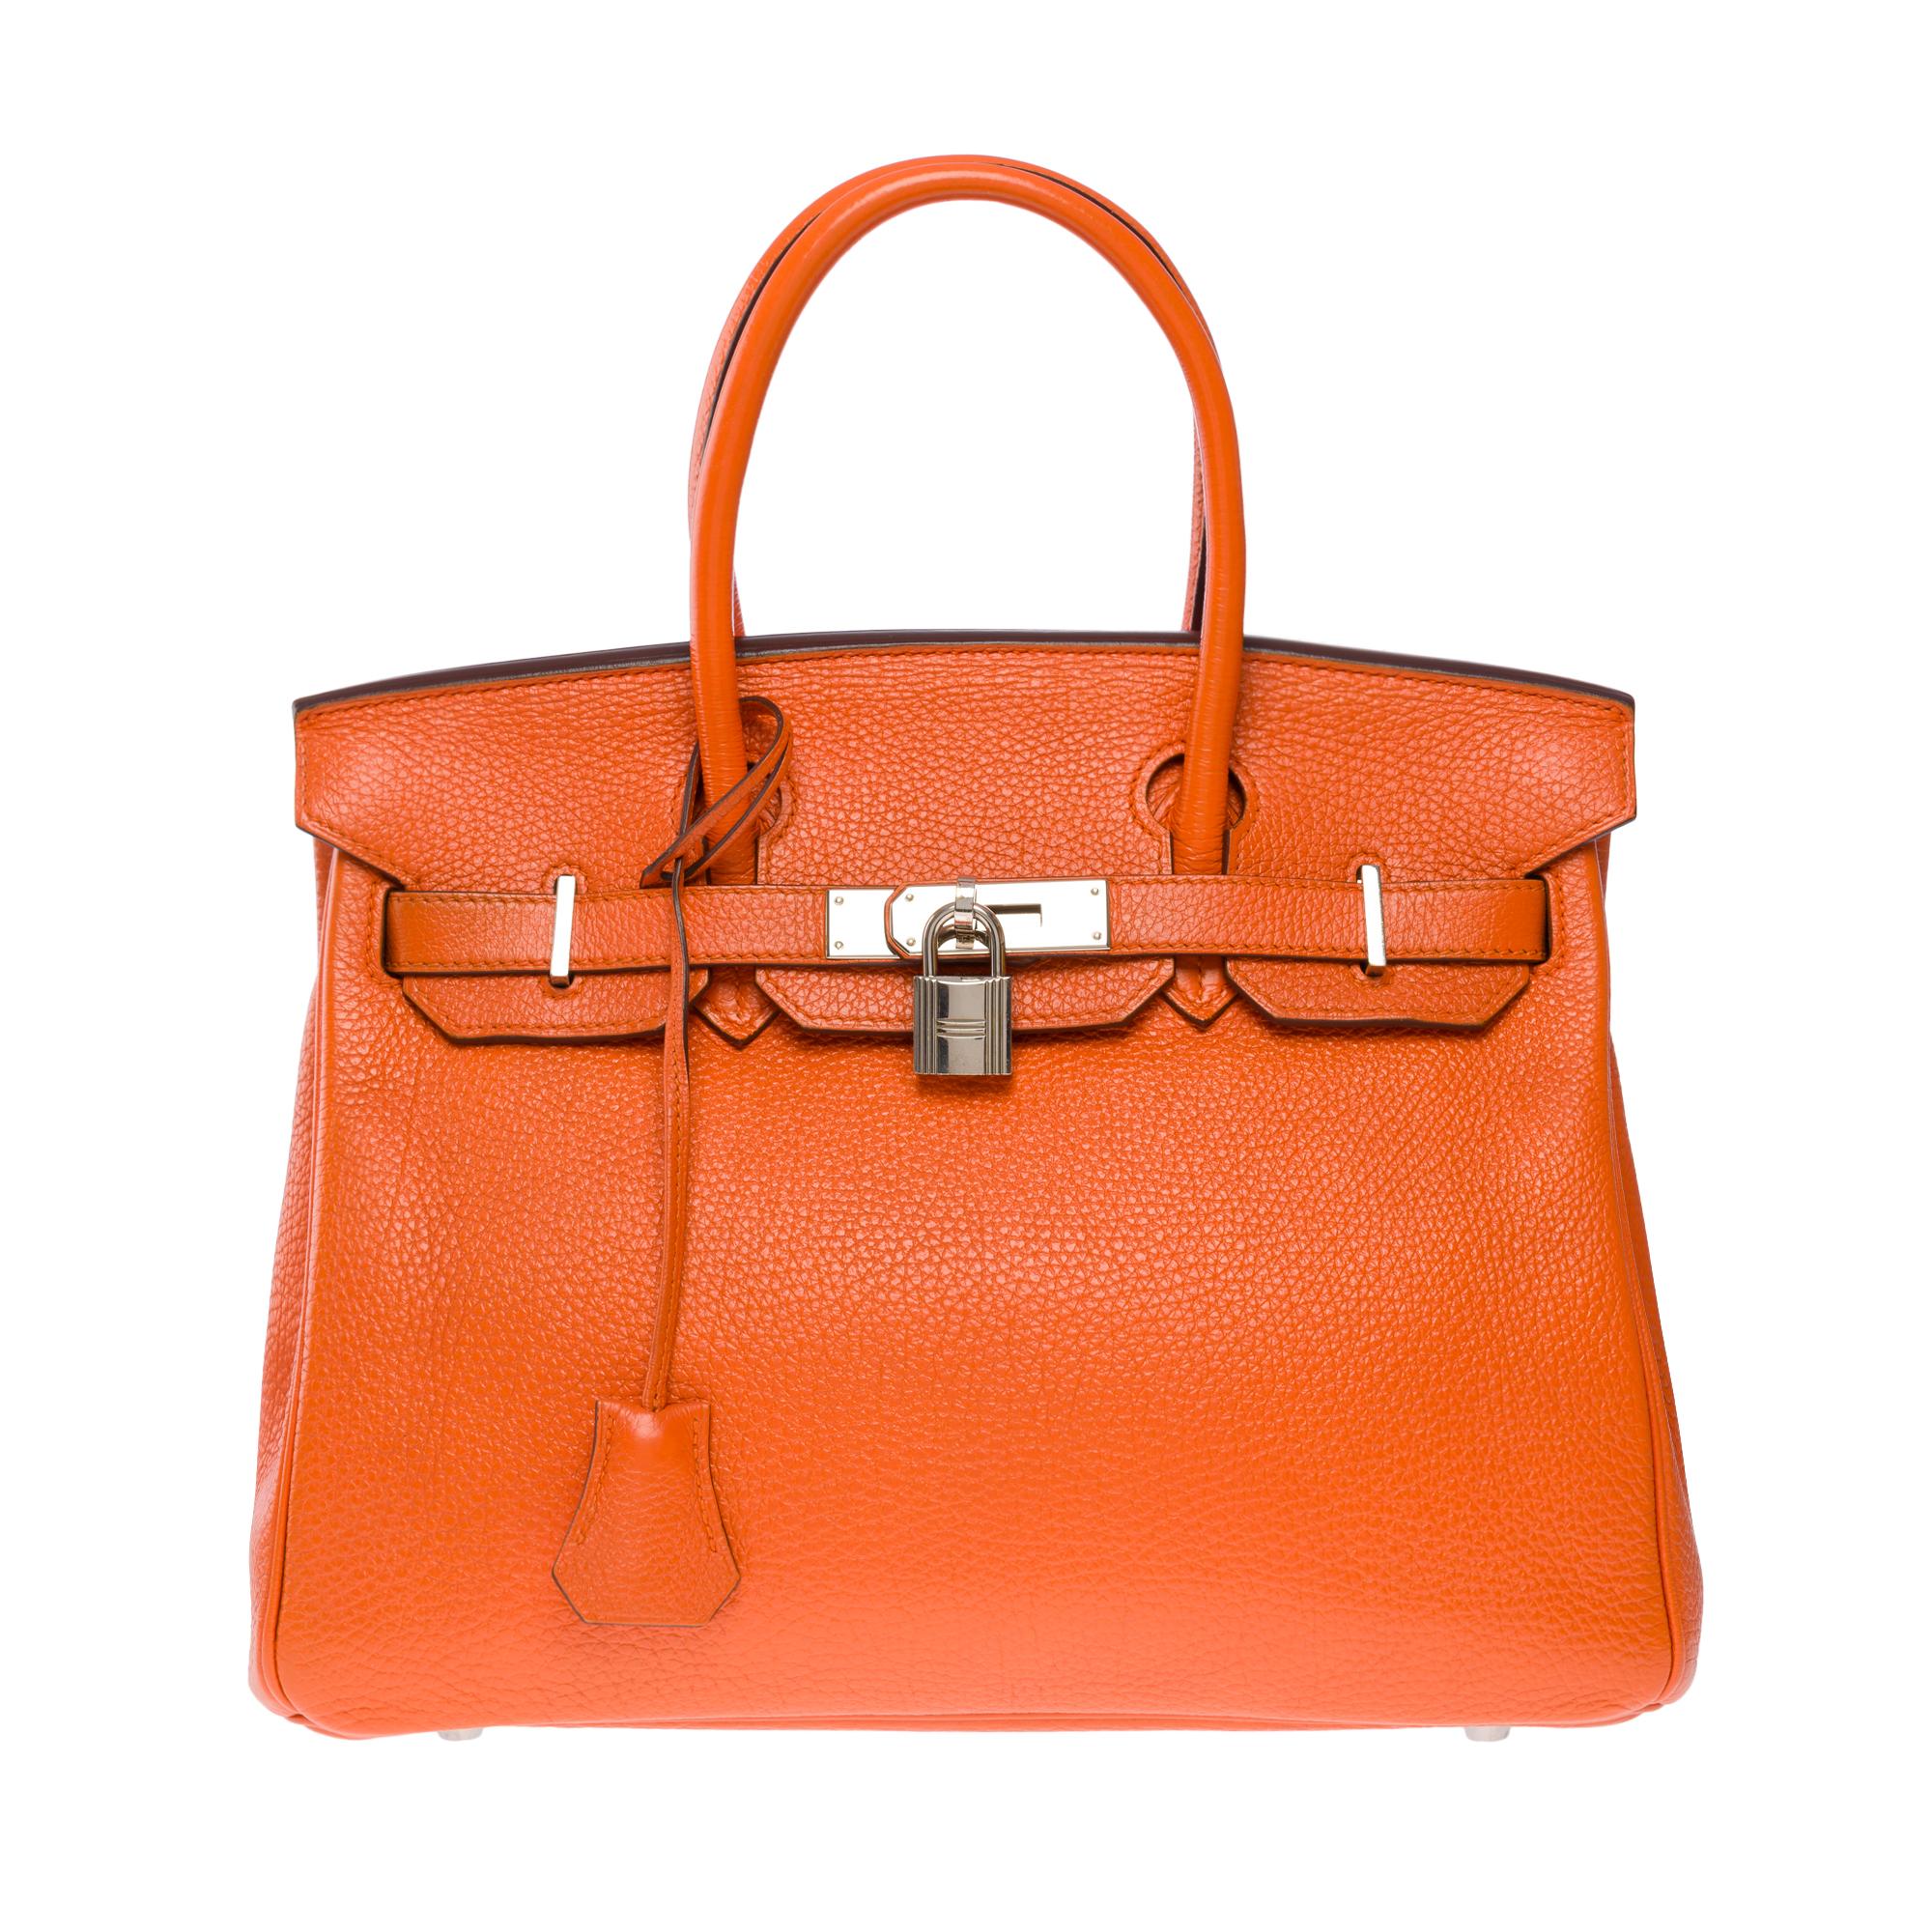 Amazing & Bright Hermes Birkin 30 handbag in Orange H Togo leather , palladium silver metal hardware, double handle in orange leather allowing a hand carry

Flap closure
Orange leather lining, one zip pocket, one patch pocket
Signature: 